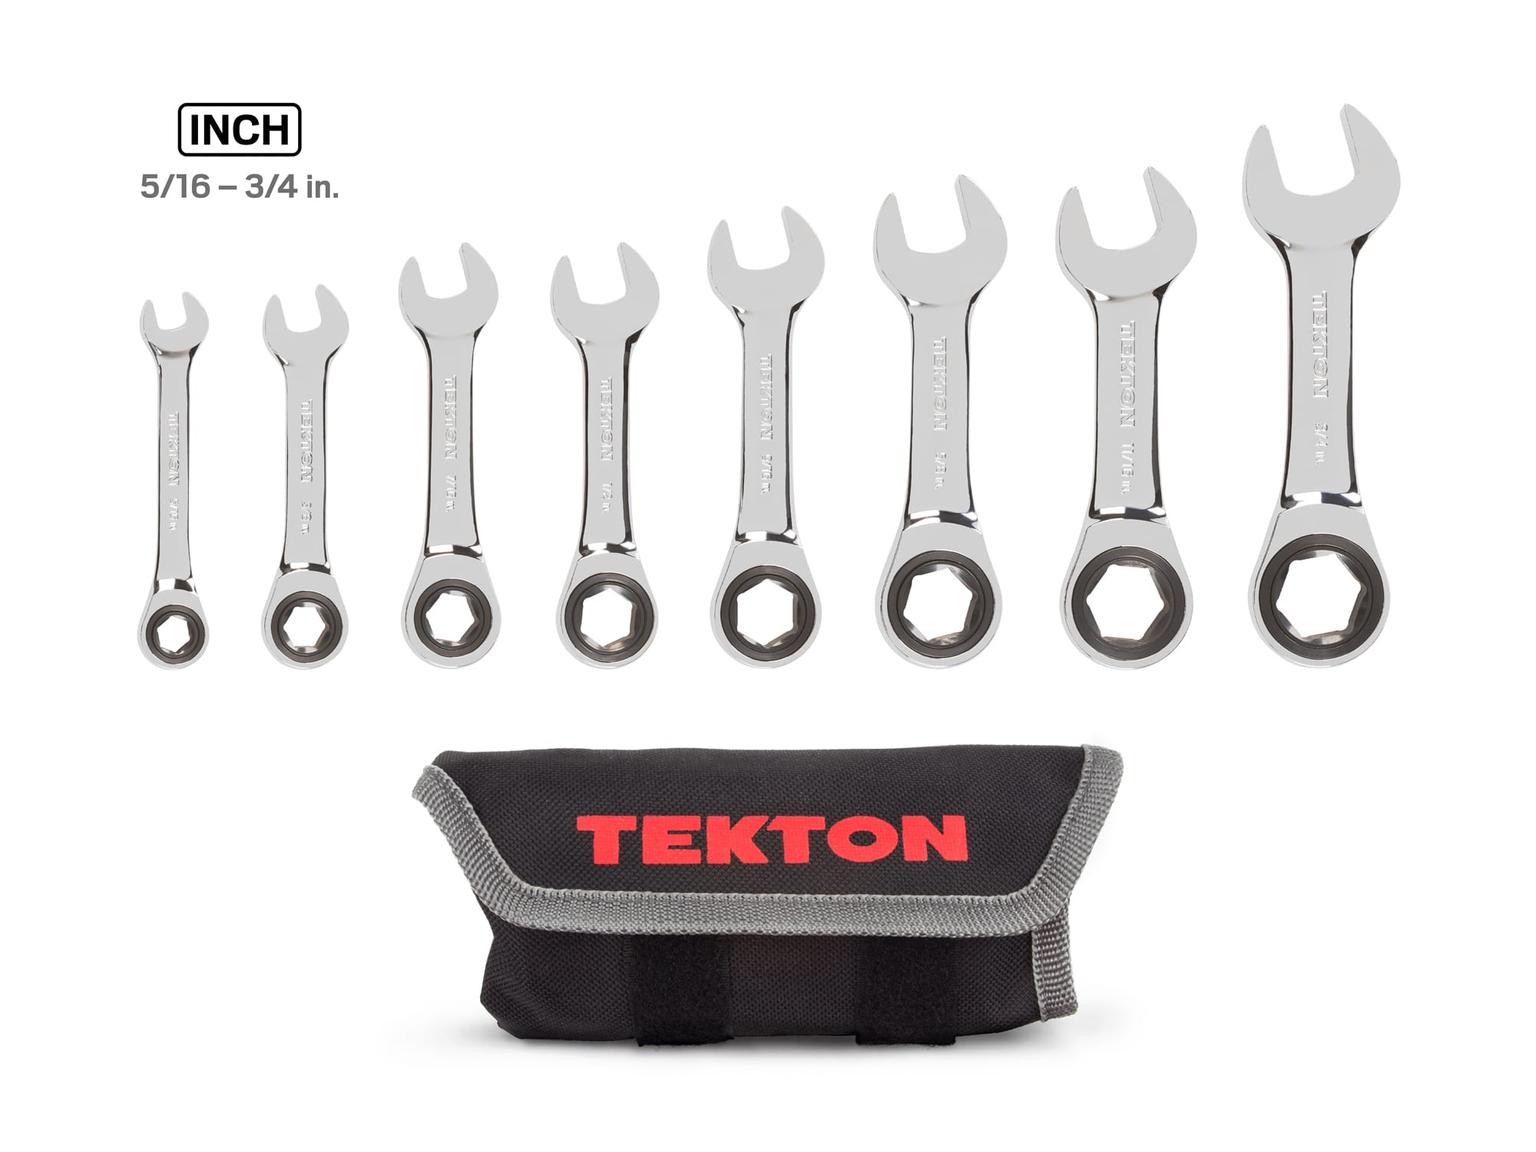 TEKTON WRN50086-T Stubby Ratcheting Combination Wrench Set with Pouch, 8-Piece (5/16-3/4 in.)